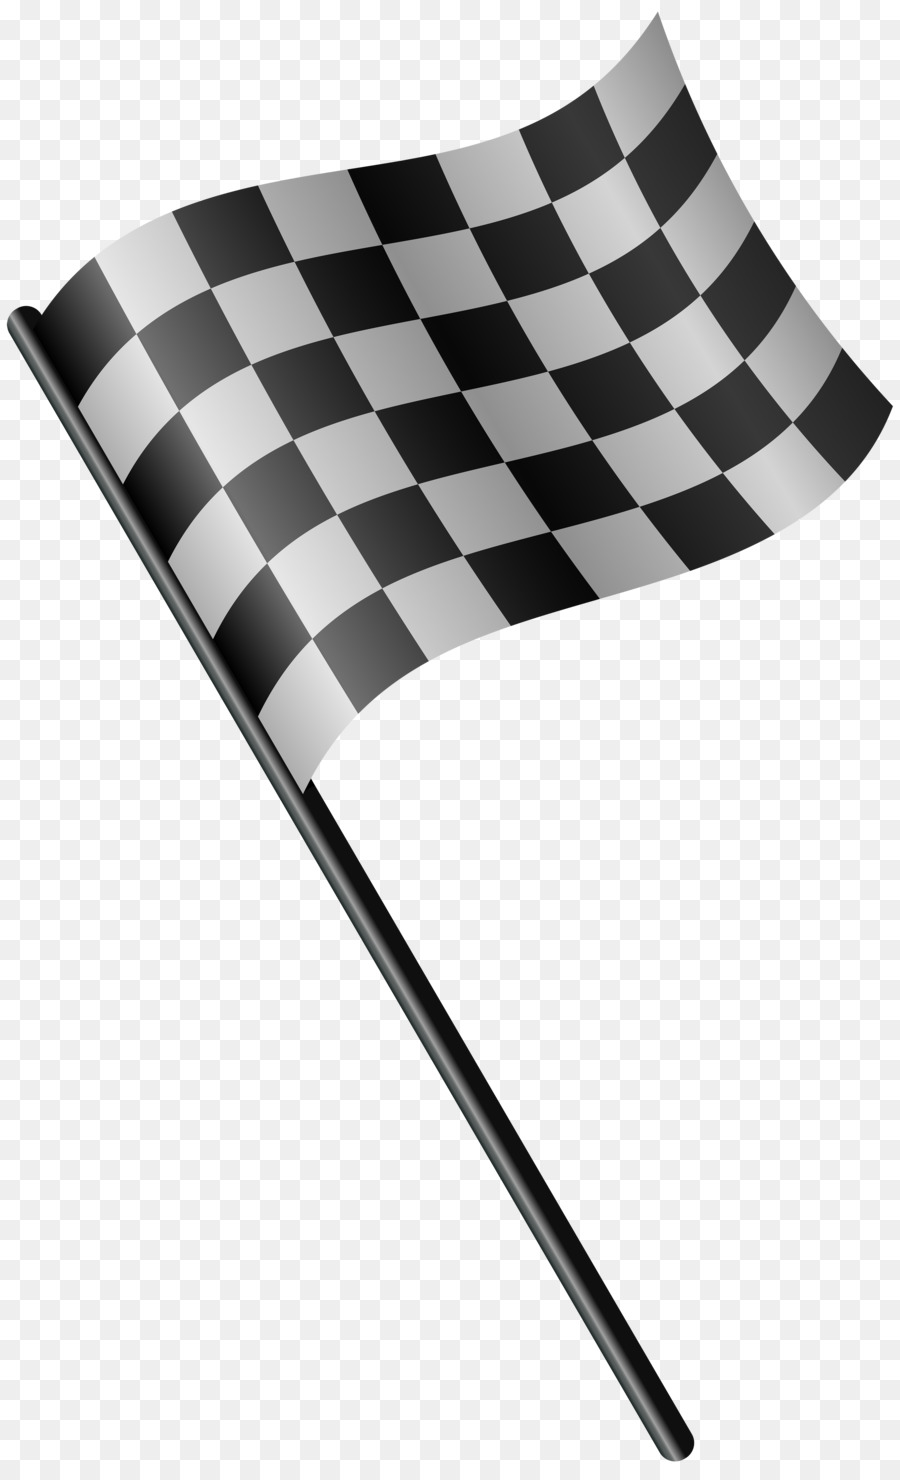 Racing flags Clip art - checkered flag png download - 3665*6000 - Free Transparent Flag png Download.